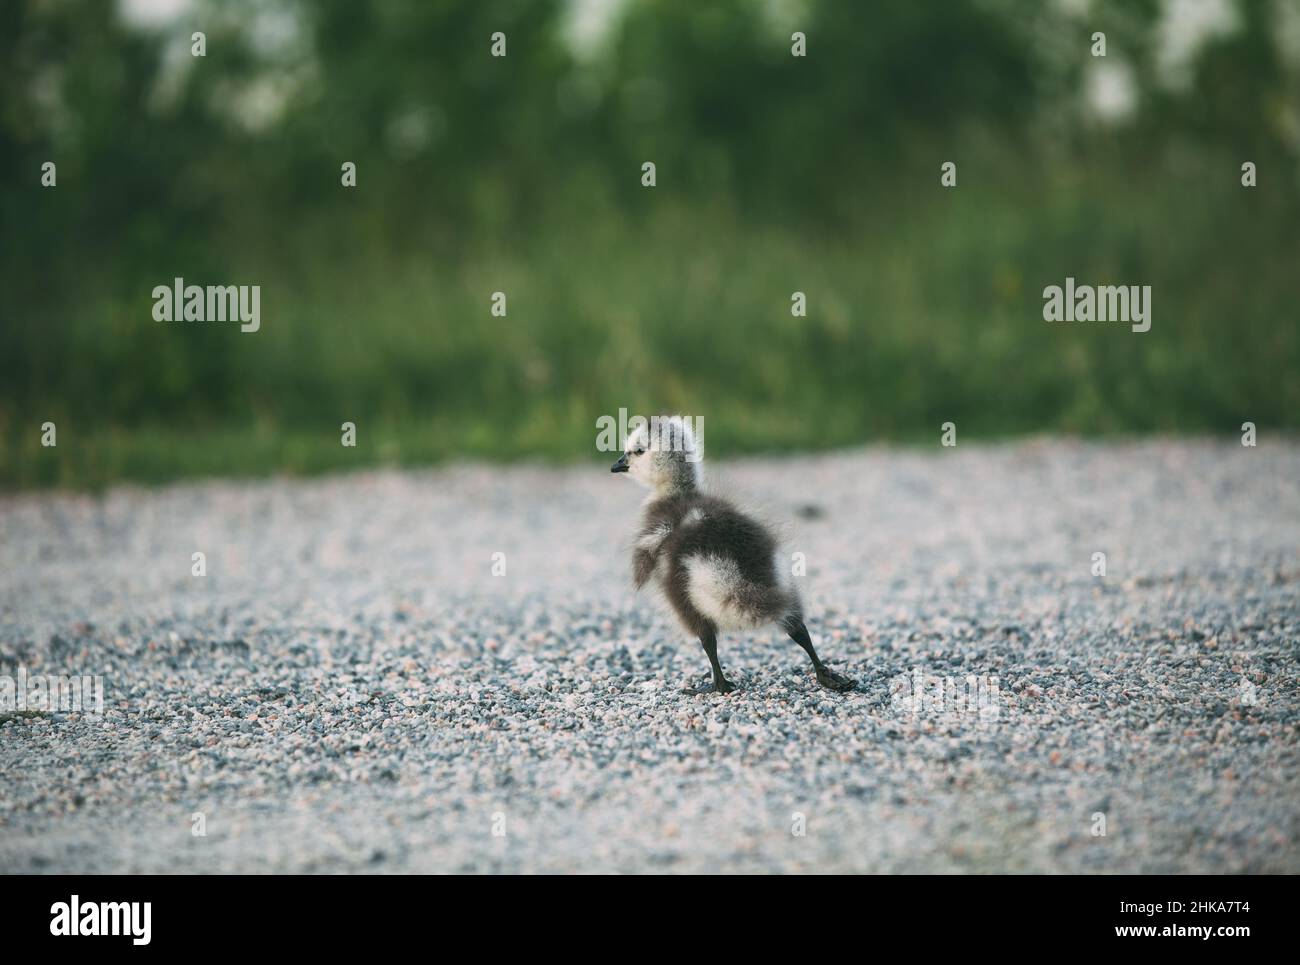 Barnacle goose gosling standing a path. Green grass in the background. Branta leucopsis. Stock Photo